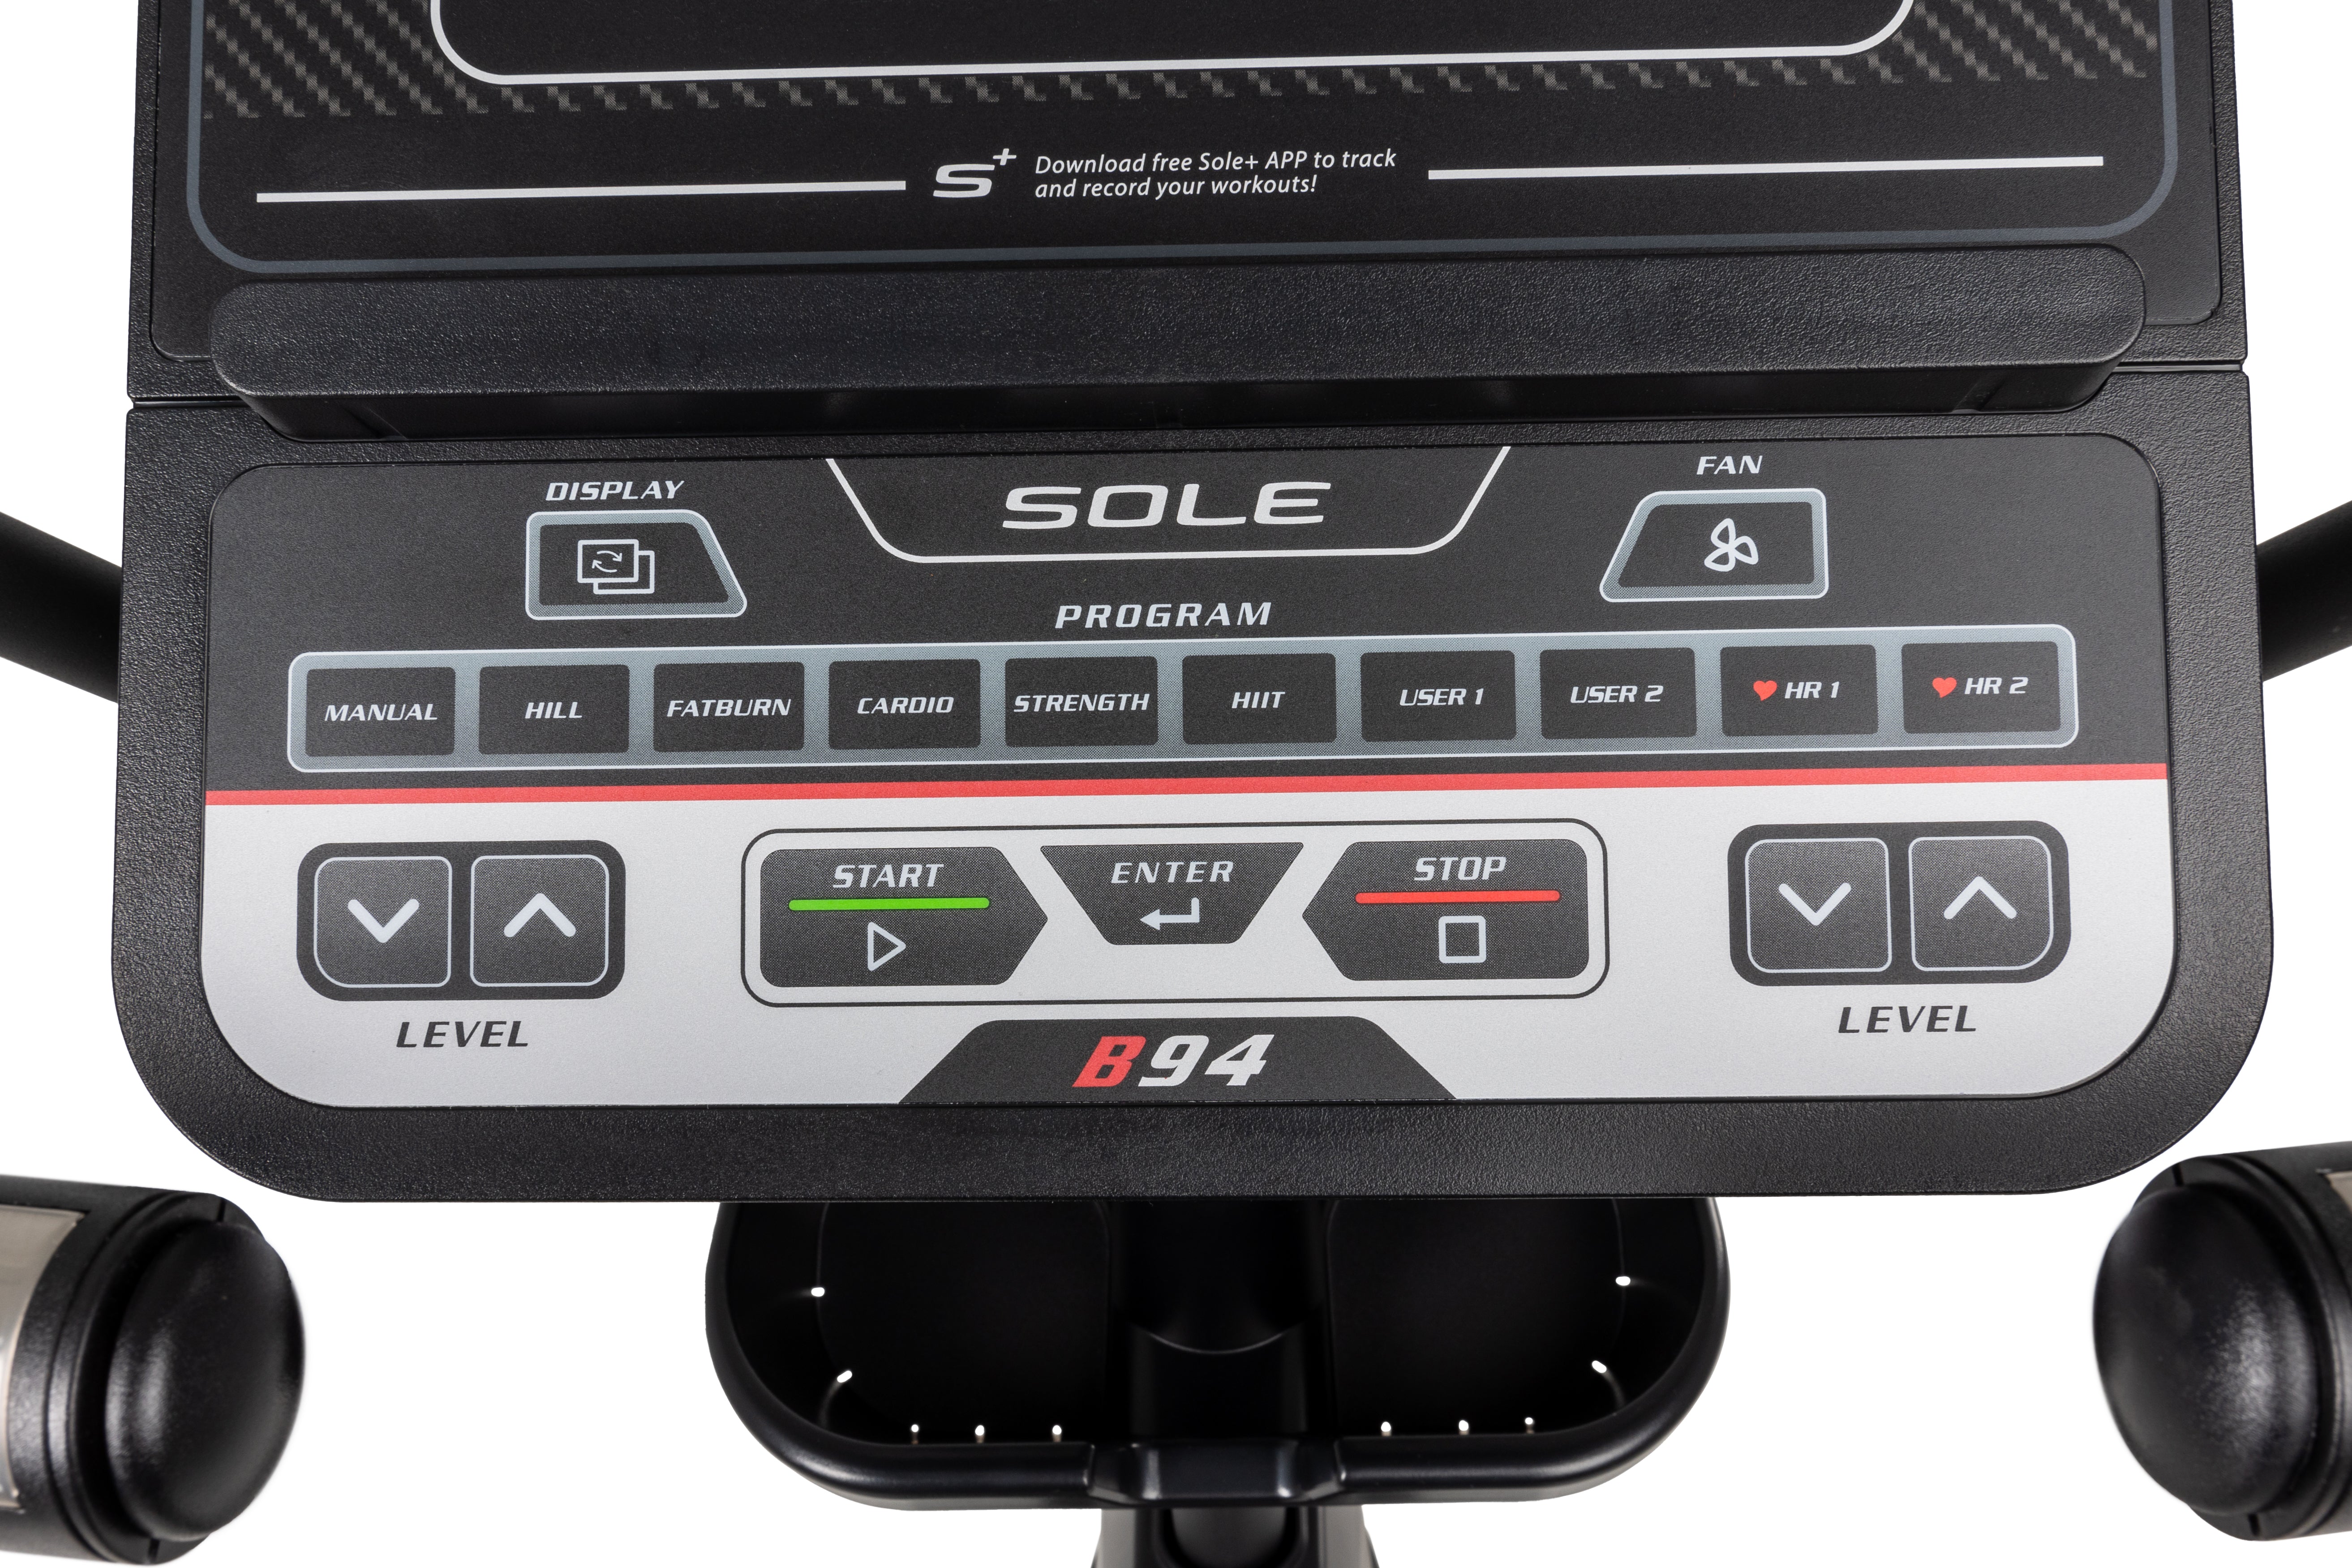 Close-up view of the Sole B94 exercise machine's control panel featuring labeled buttons for various workout programs, a digital screen prompt to download the Sole app, and adjustment controls for resistance levels, with handlebars and a cup holder visible below.